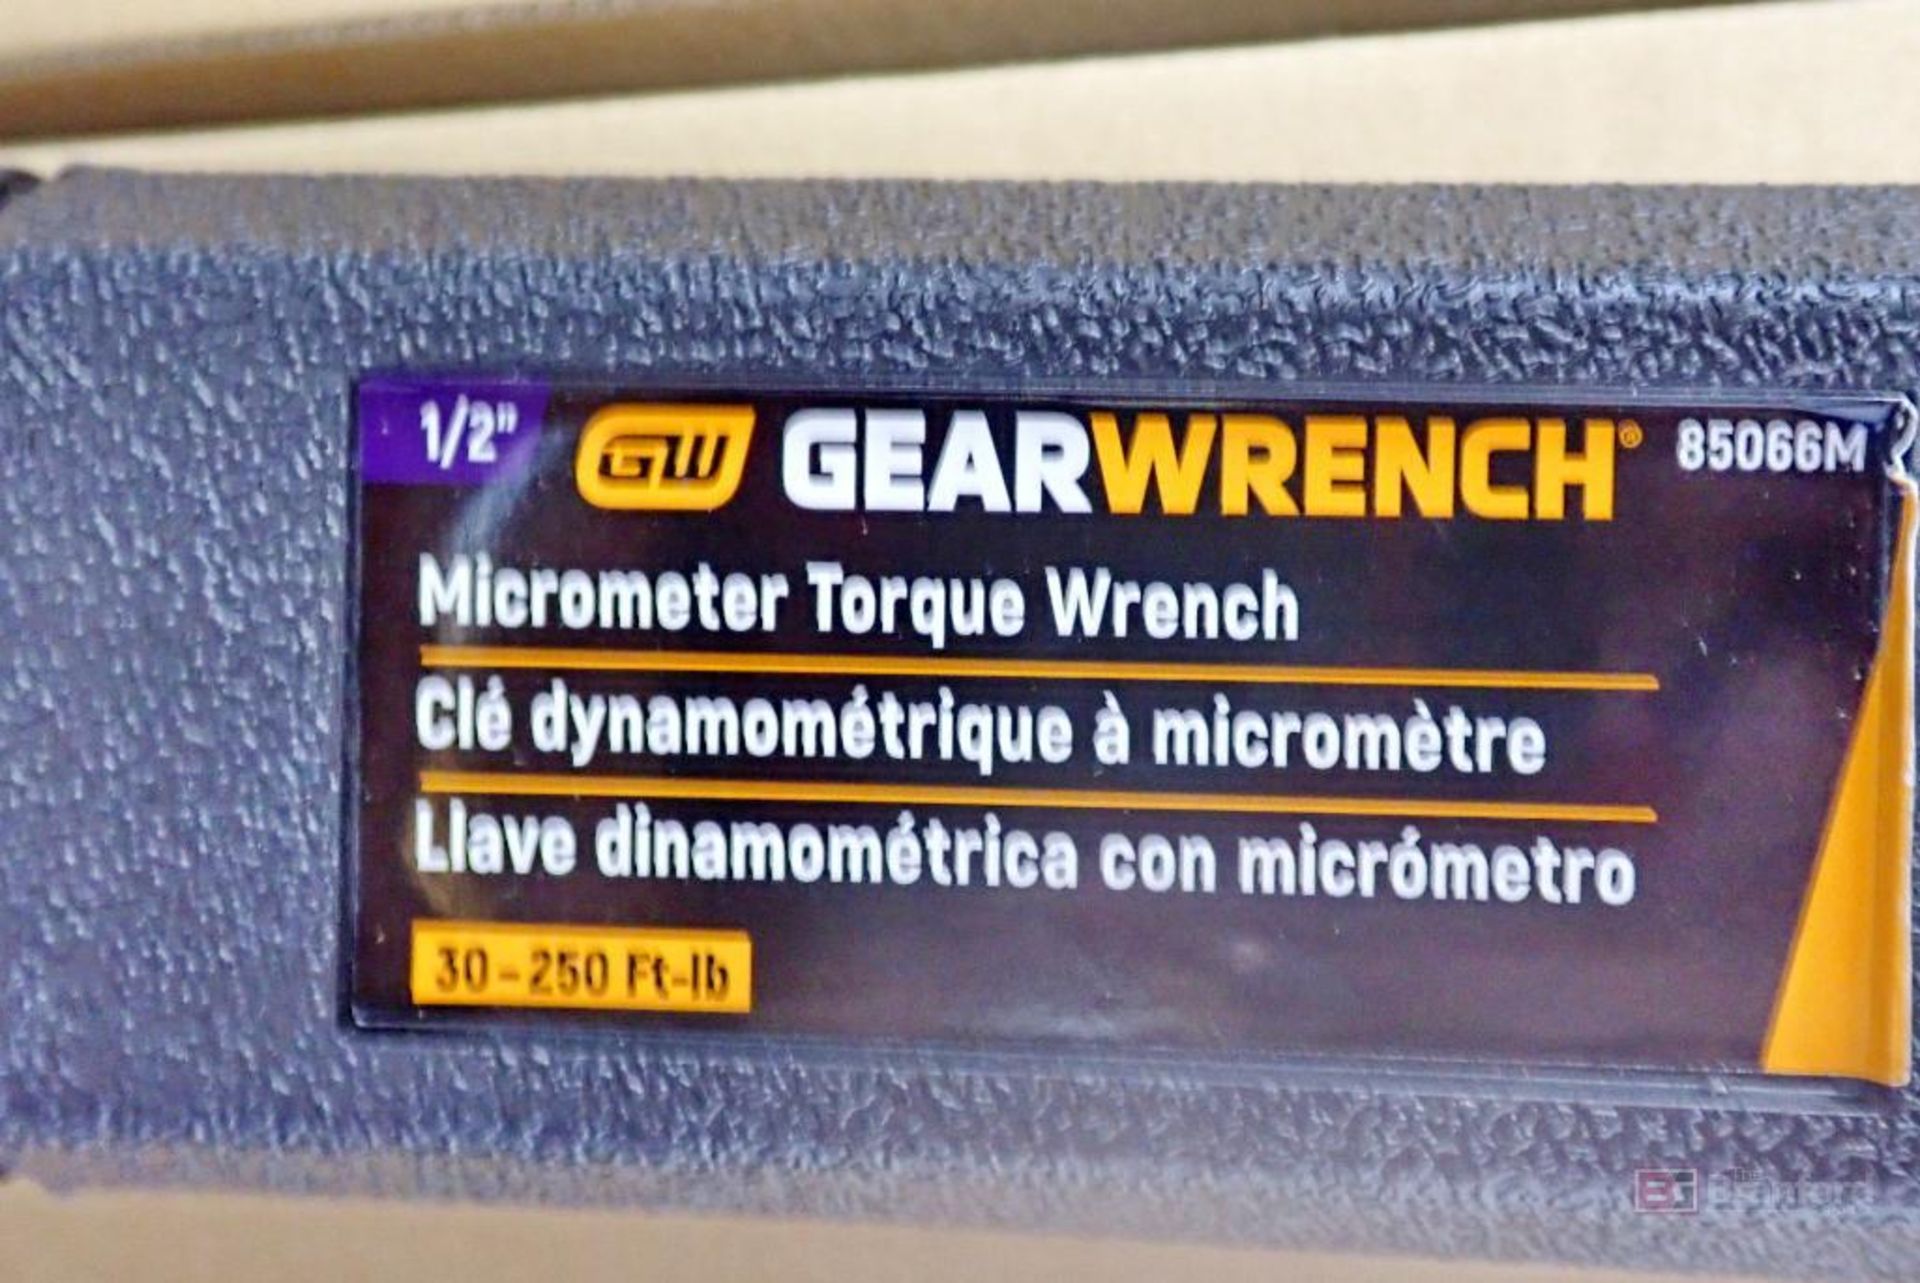 GearWrench 85066M (8612115) 1/2" Drive Micrometer Torque Wrench - Image 2 of 5